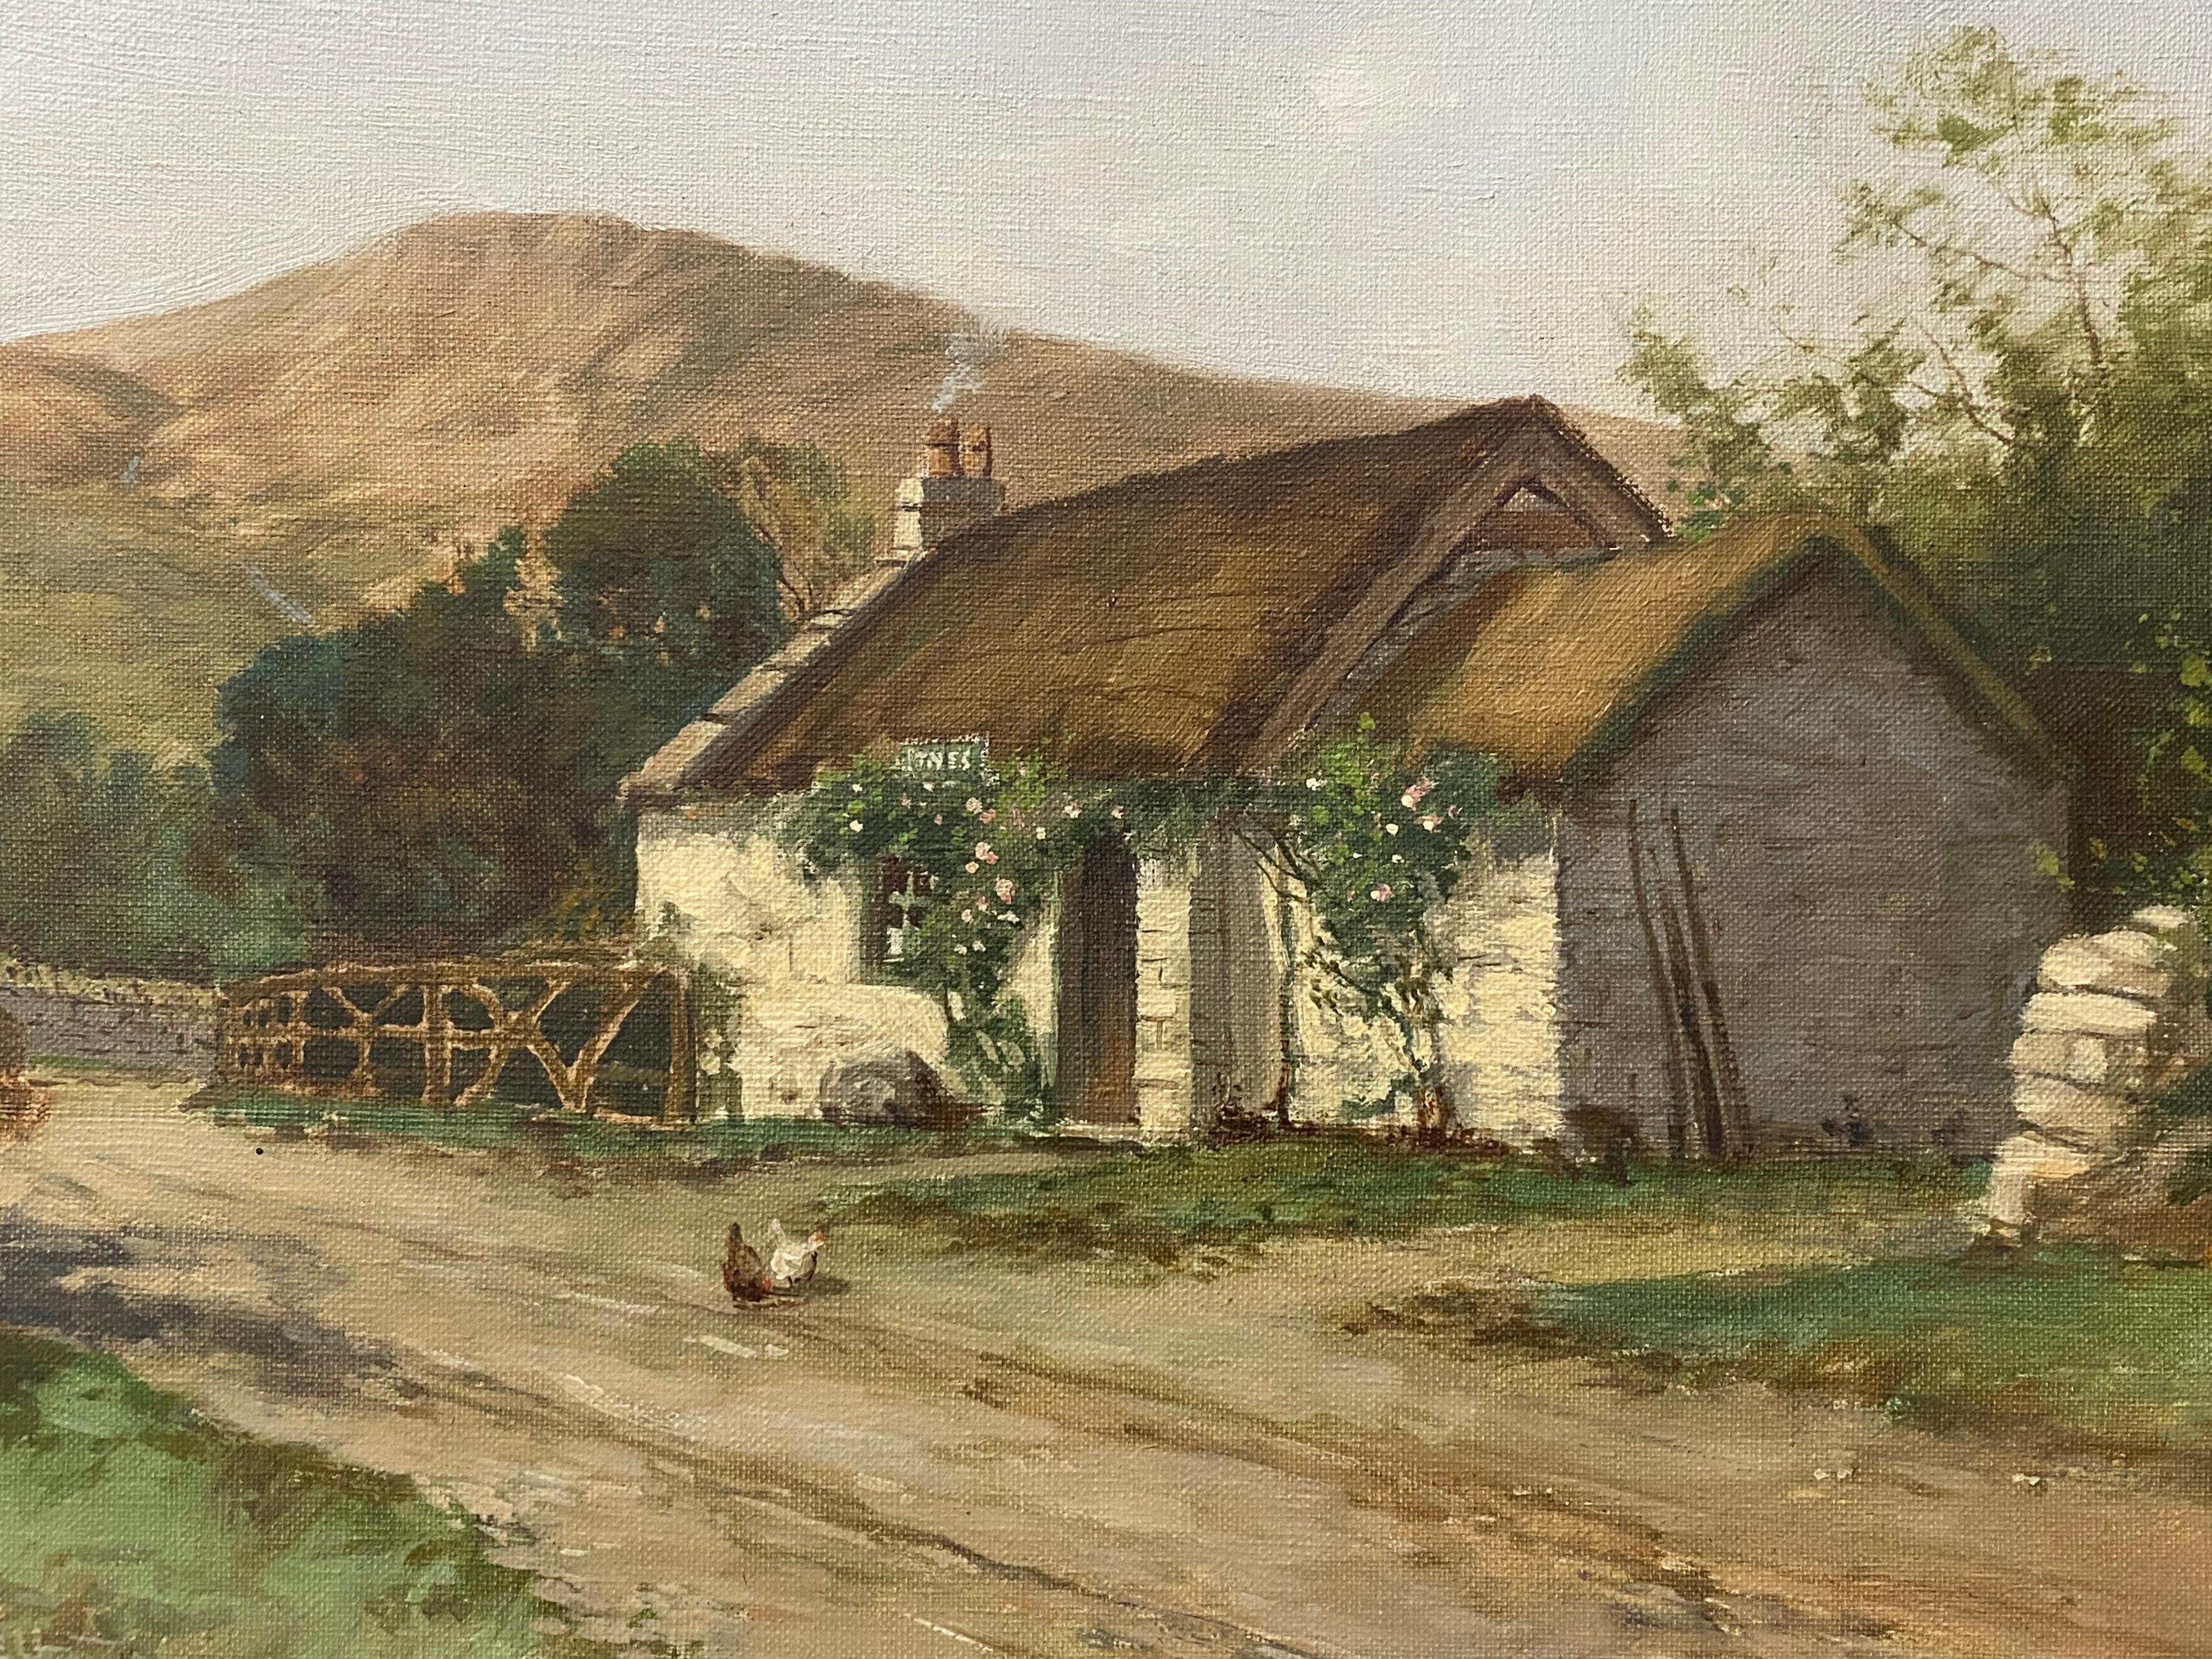 Thomas Campbell (1865 - 1943) 

Thomas Campbell was active/lived in United Kingdom, Scotland. 

Thomas Campbell is known for landscape, rural scenes with figures, marine painting.

Thatched Cottage on a Country Road with Chickens

Original oil